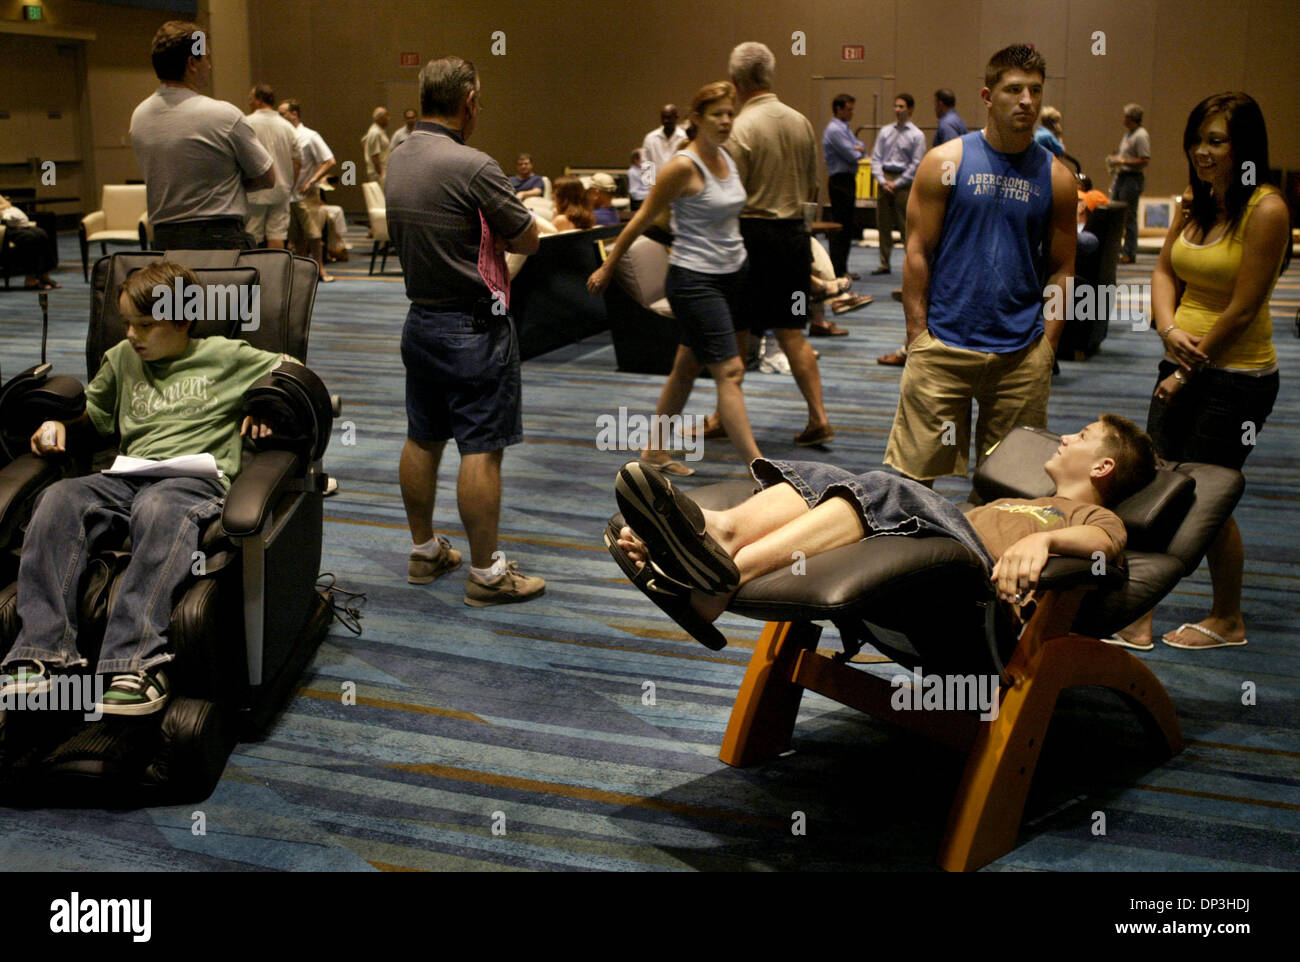 Jul 08, 2006; West Palm Beach, FL, USA; Mark Cooney (right, in chair) checks out a leather chair for sale during an auction at the Palm Beach County Convention center.  Behind him are his brother, Peter, and his brother's girlfriend, Kristen Sonntag.  Mark and Peter's mom were hoping to buy a flat screen television at the auction.  At left, Andrew Nelson sits in a chair called the  Stock Photo